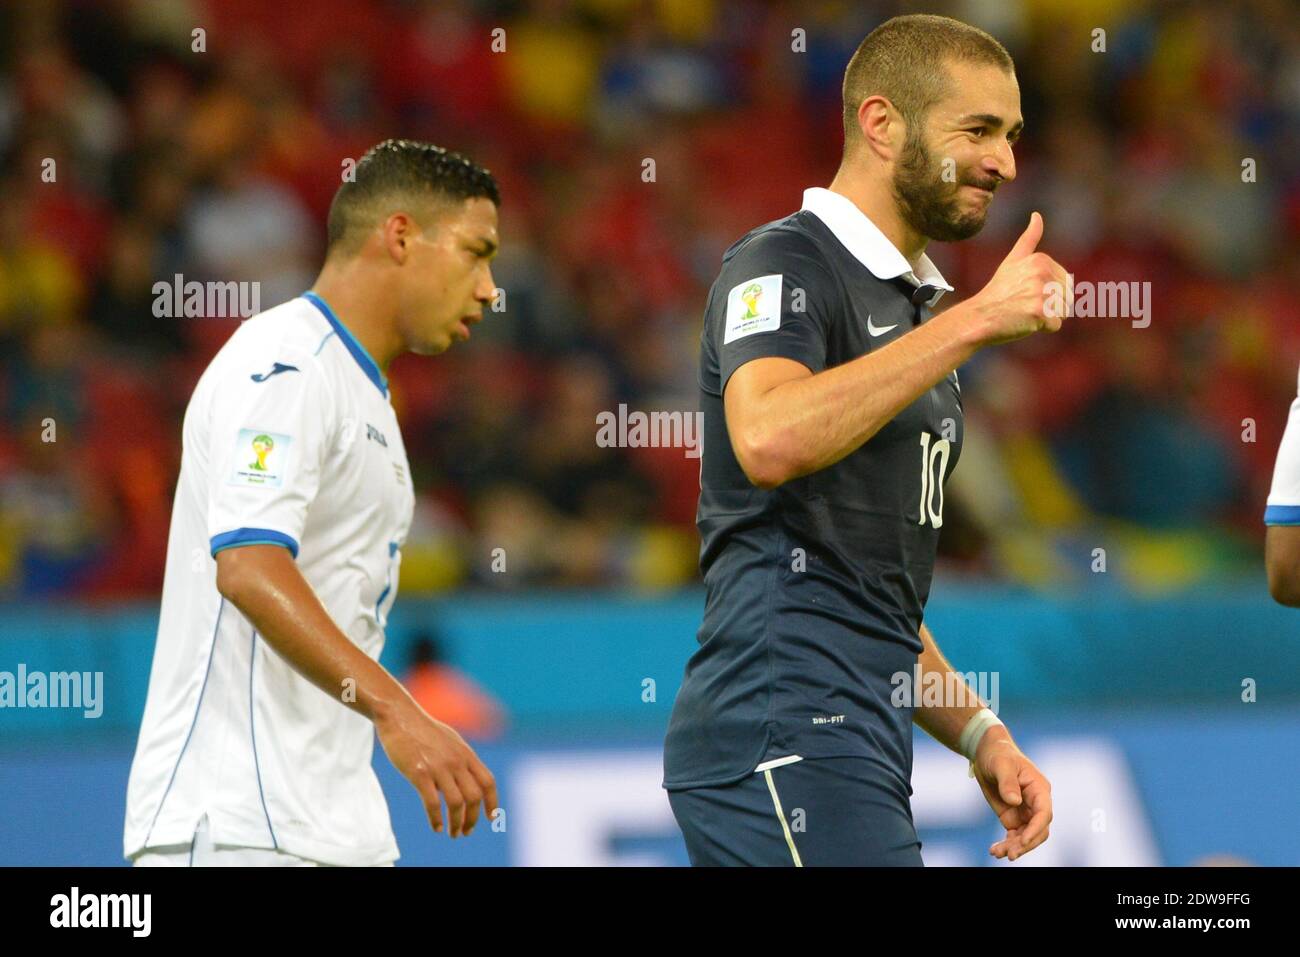 Goal-line technology was used for the first time in a World Cup match to decide if the ball had crossed the line during France's Group E clash with Honduras on Sunday. A shot from France forward Karim Benzema cannoned off the post and back across the face of goal before Honduran goalkeeper Noel Valladares inadvertently pushed it towards his own net. Despite his desperate efforts to scramble the ball clear, the referee awarded the goal with the aid of technology provided by German company GoalControl to put France 2-0 ahead. File Photo : Karim Benzema at Group E match between France v Honduras Stock Photo